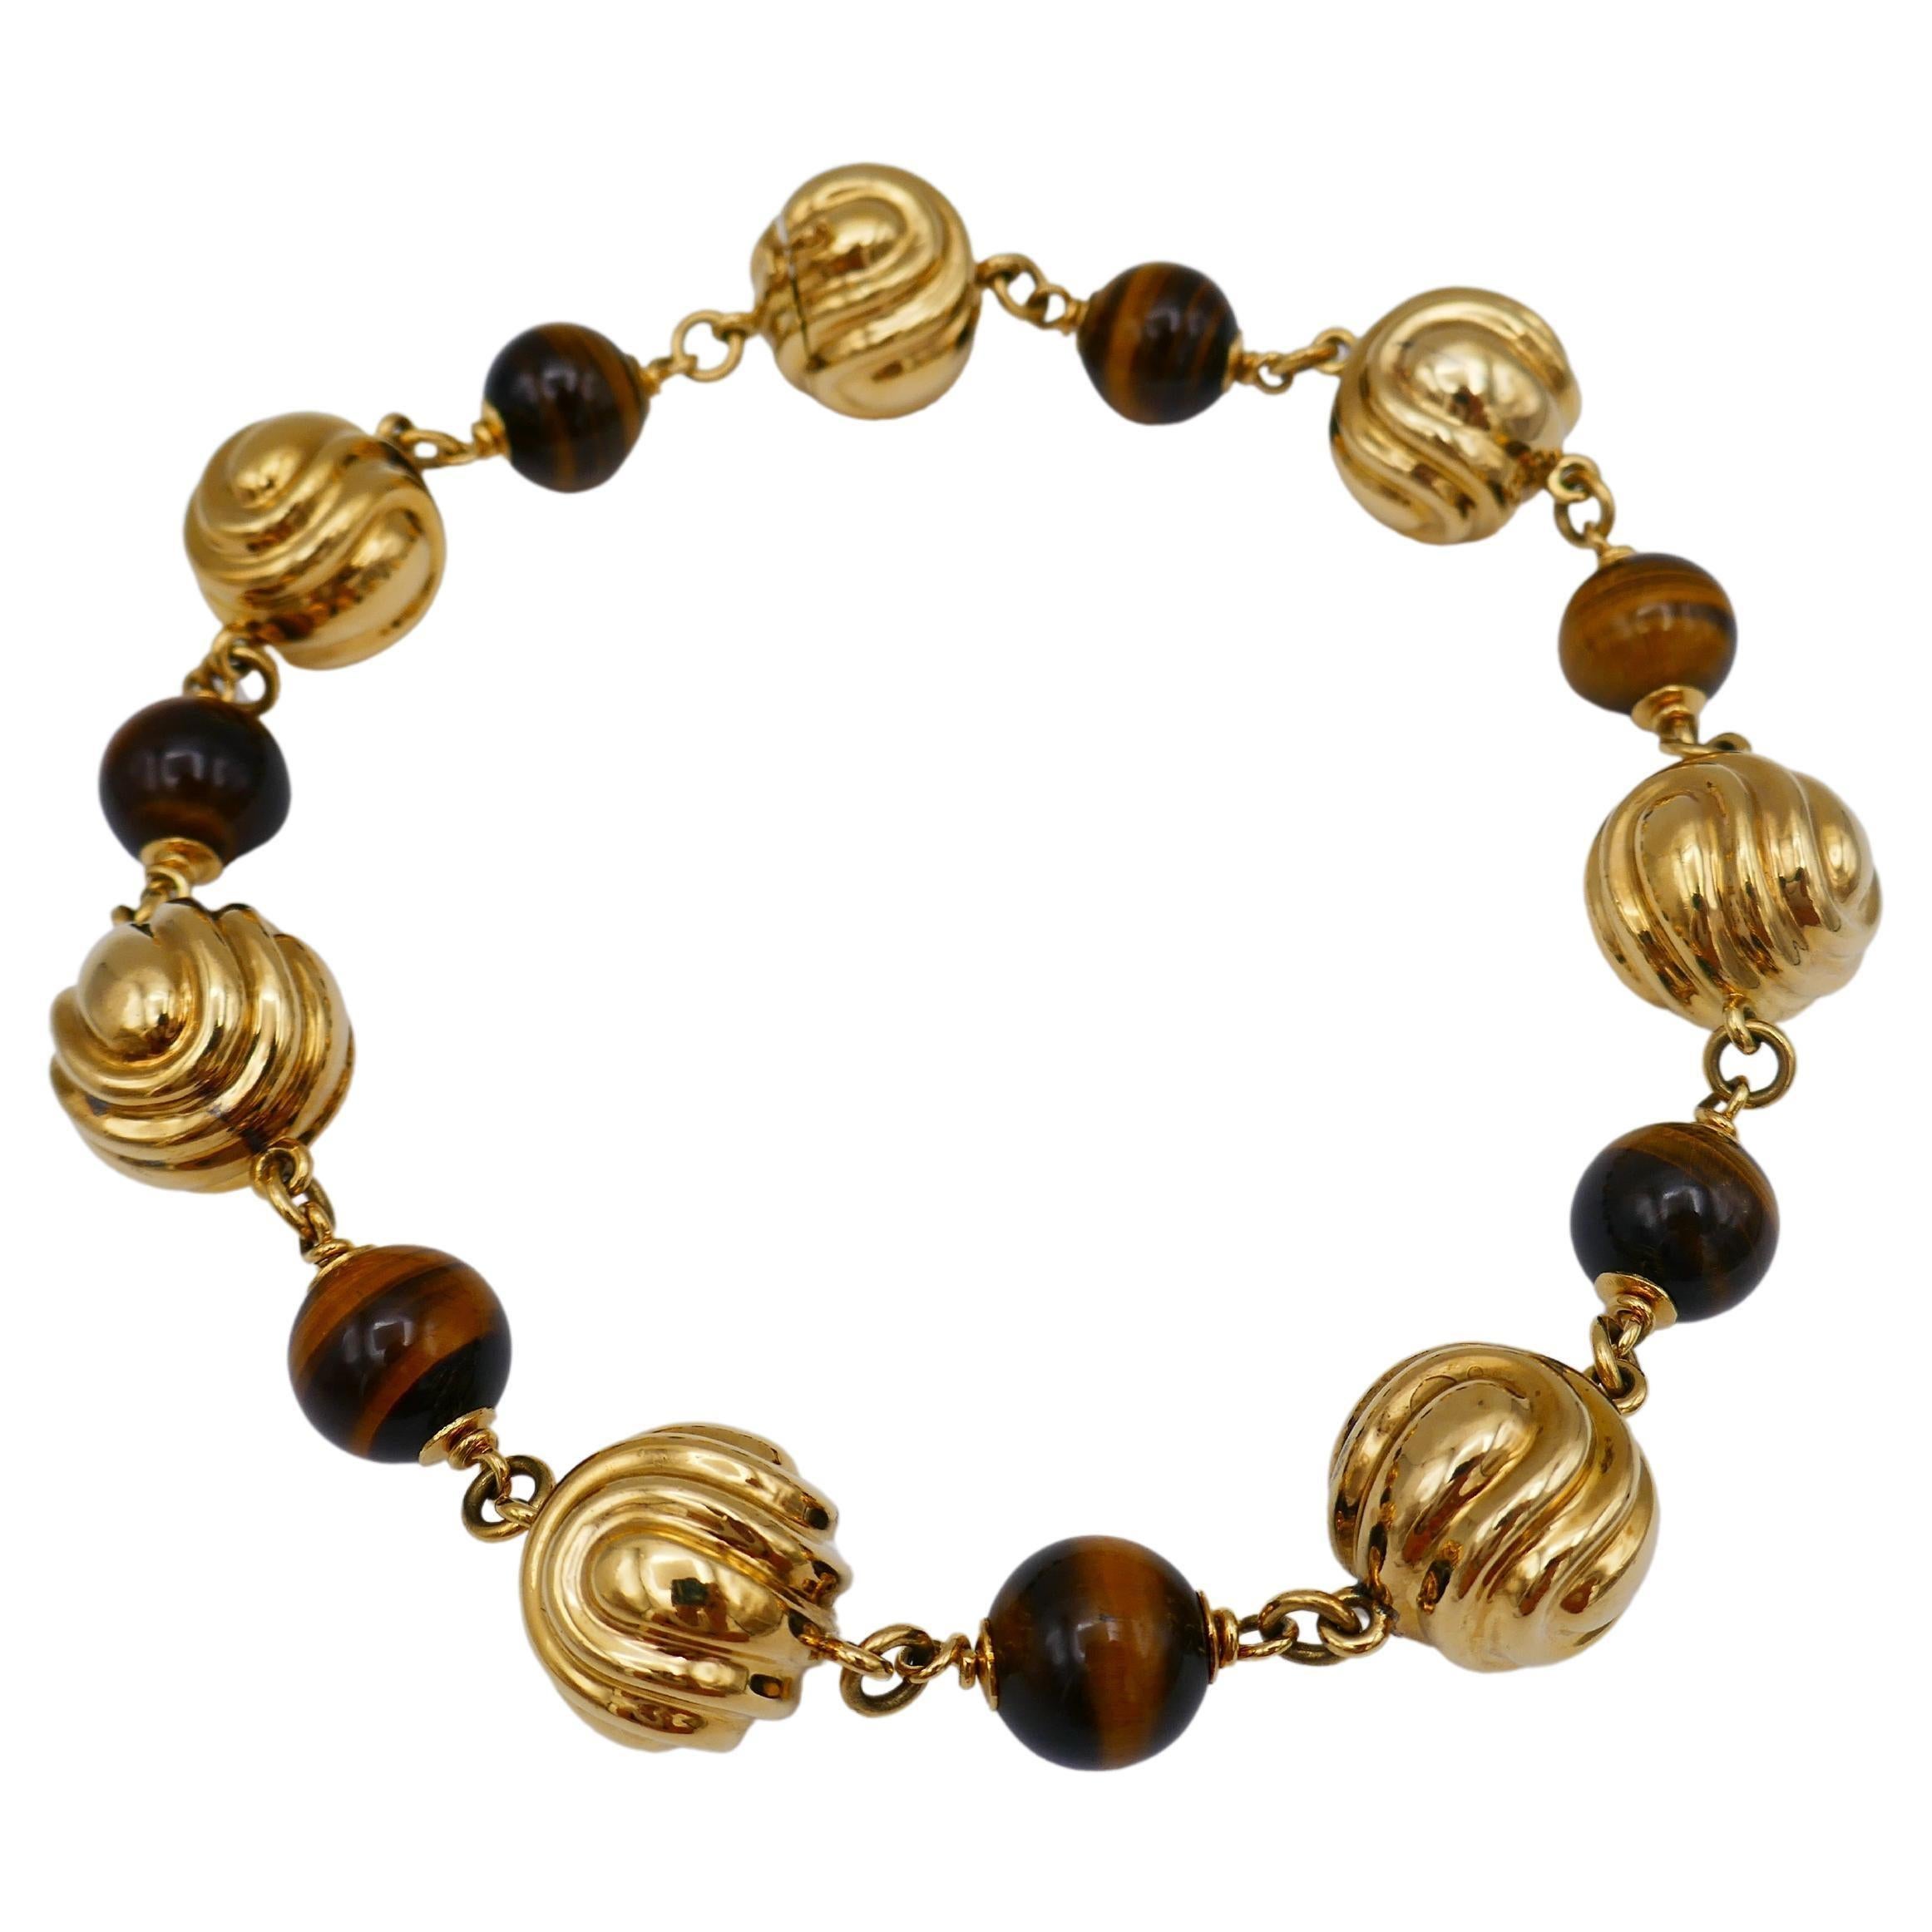 A bold and ballsy gold necklace by Bulgari featuring tiger's eye.
Its glossy silky polish shines and radiates miles away, so this piece is certainly a show stopper.
The gold balls have a beautiful wavy texture. 
The necklace sits perfectly on a